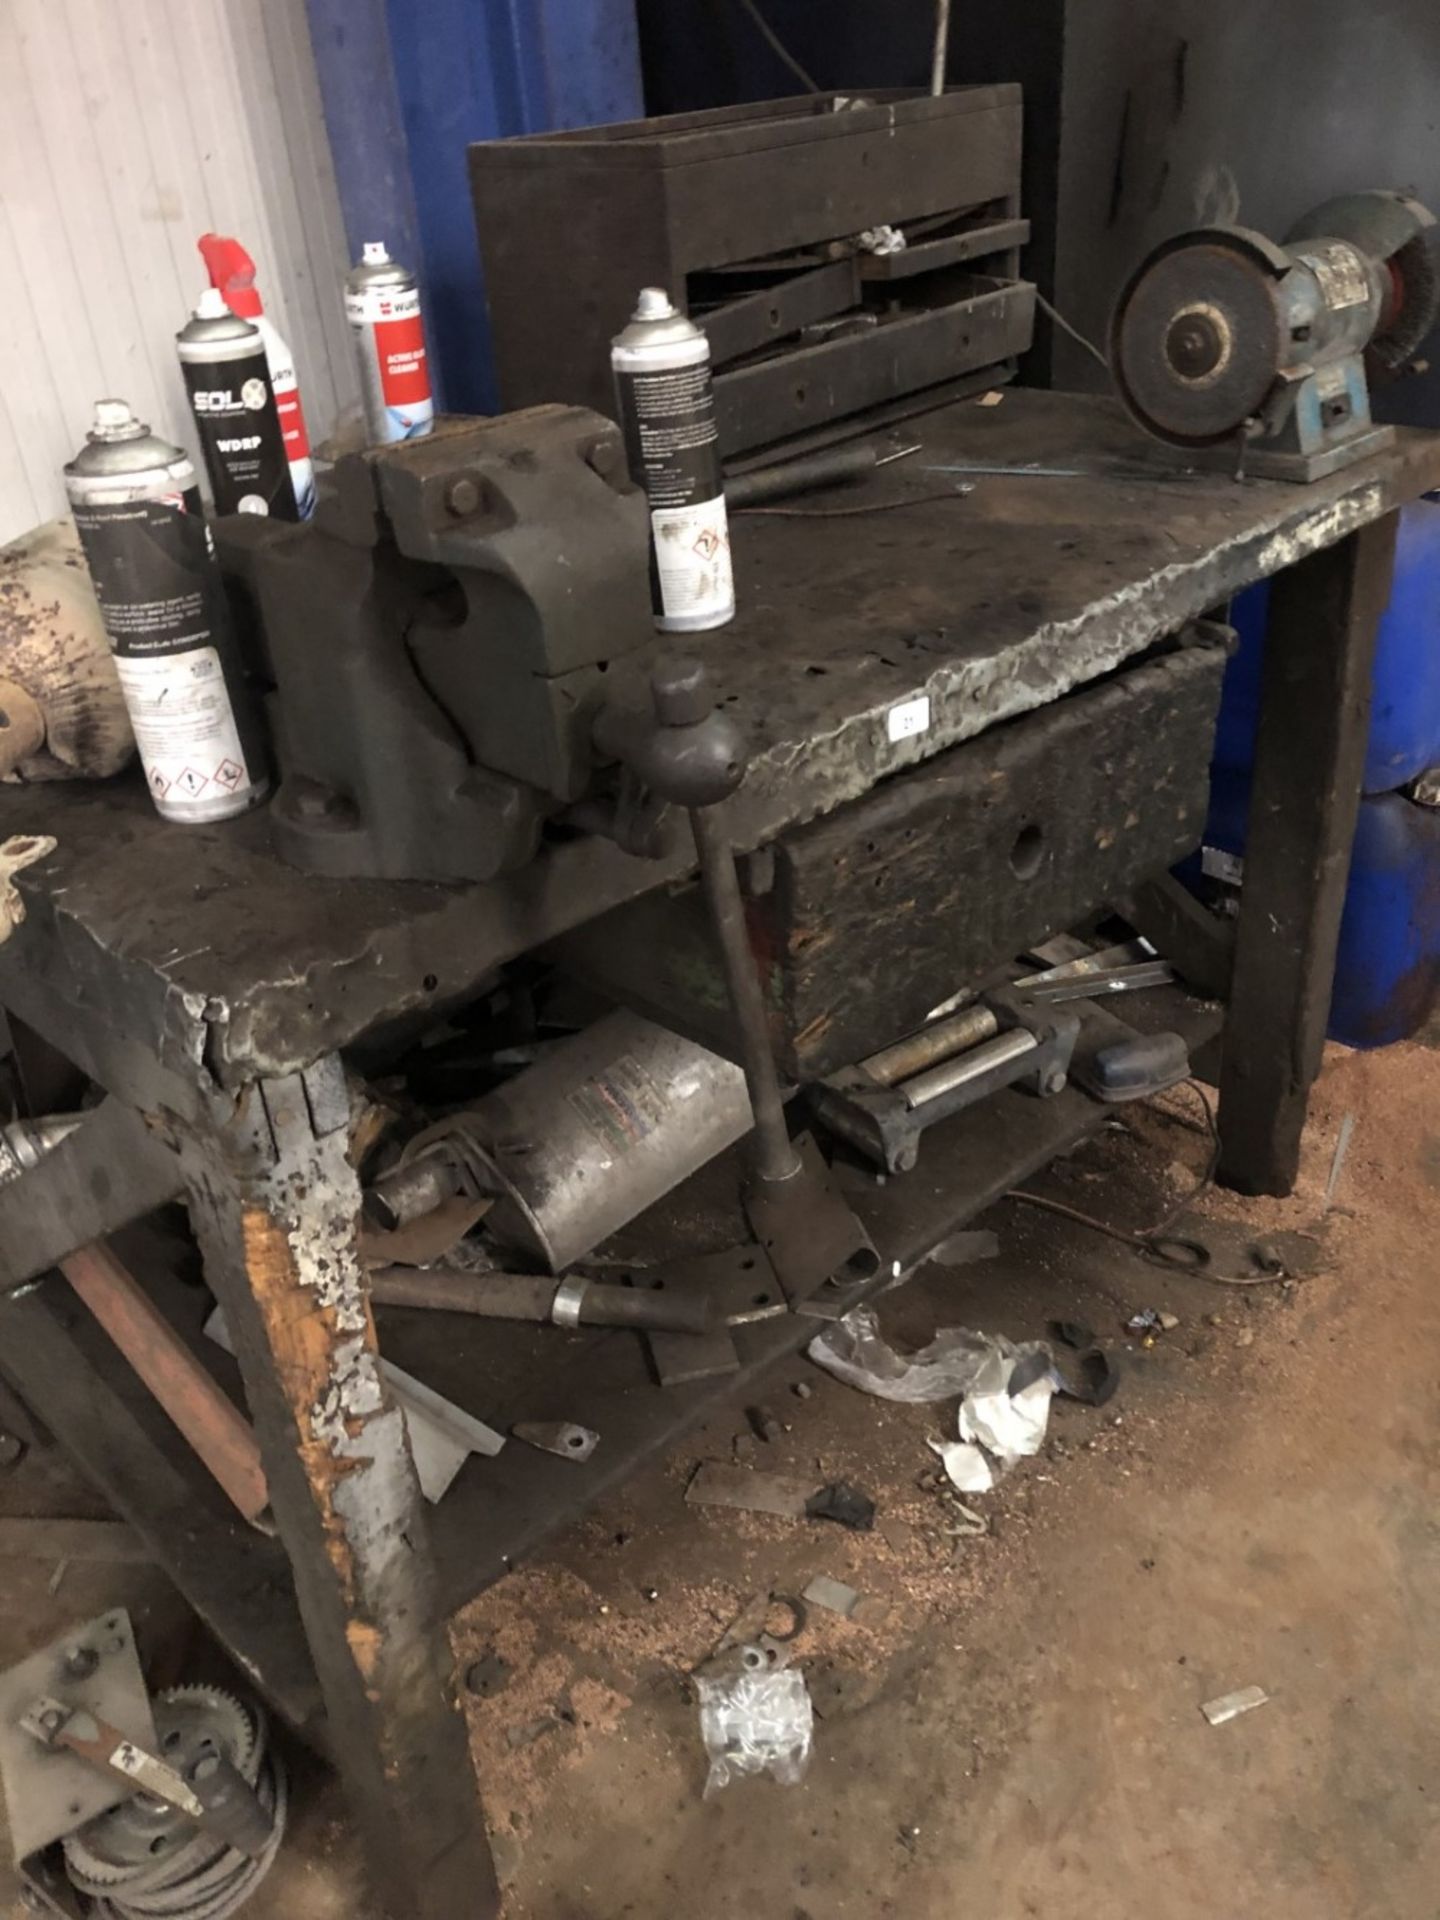 A metal worker's bench, with grinder.